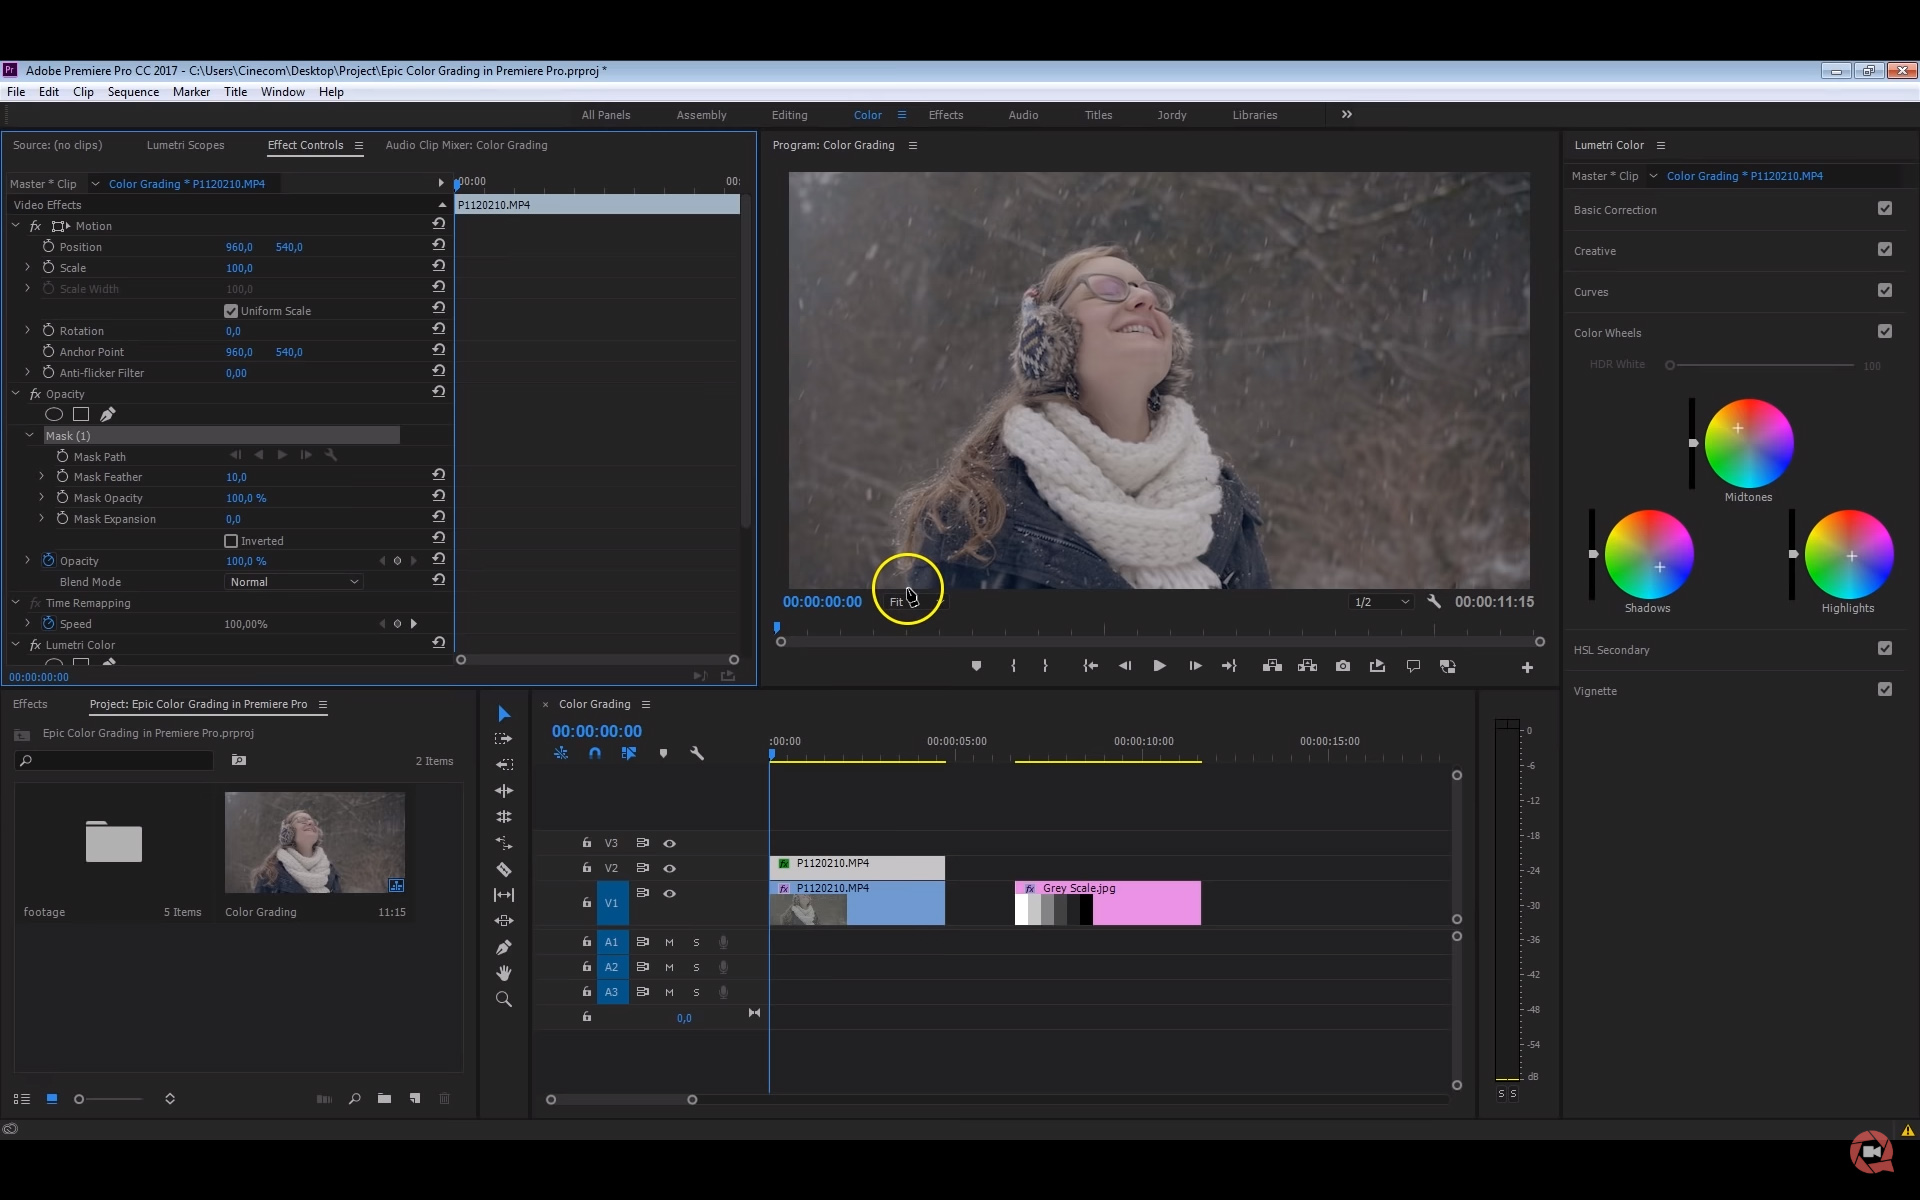 The Complete COLOR GRADING Tutorial for Premiere Pro: CINEMATIC FILM LOOK